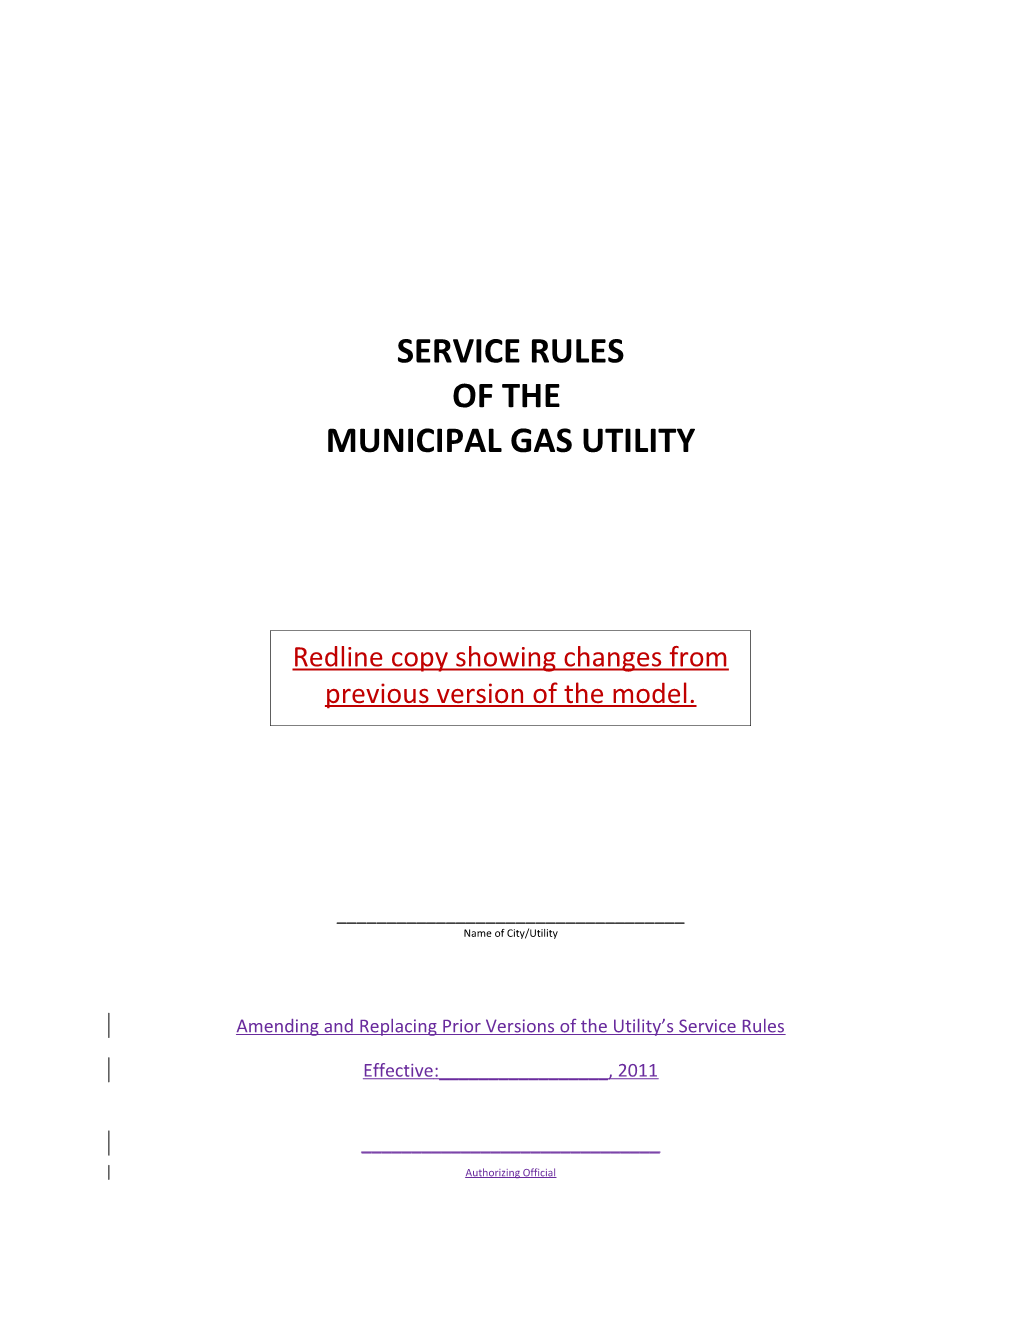 Service Rules of the Municipal Gas Utility